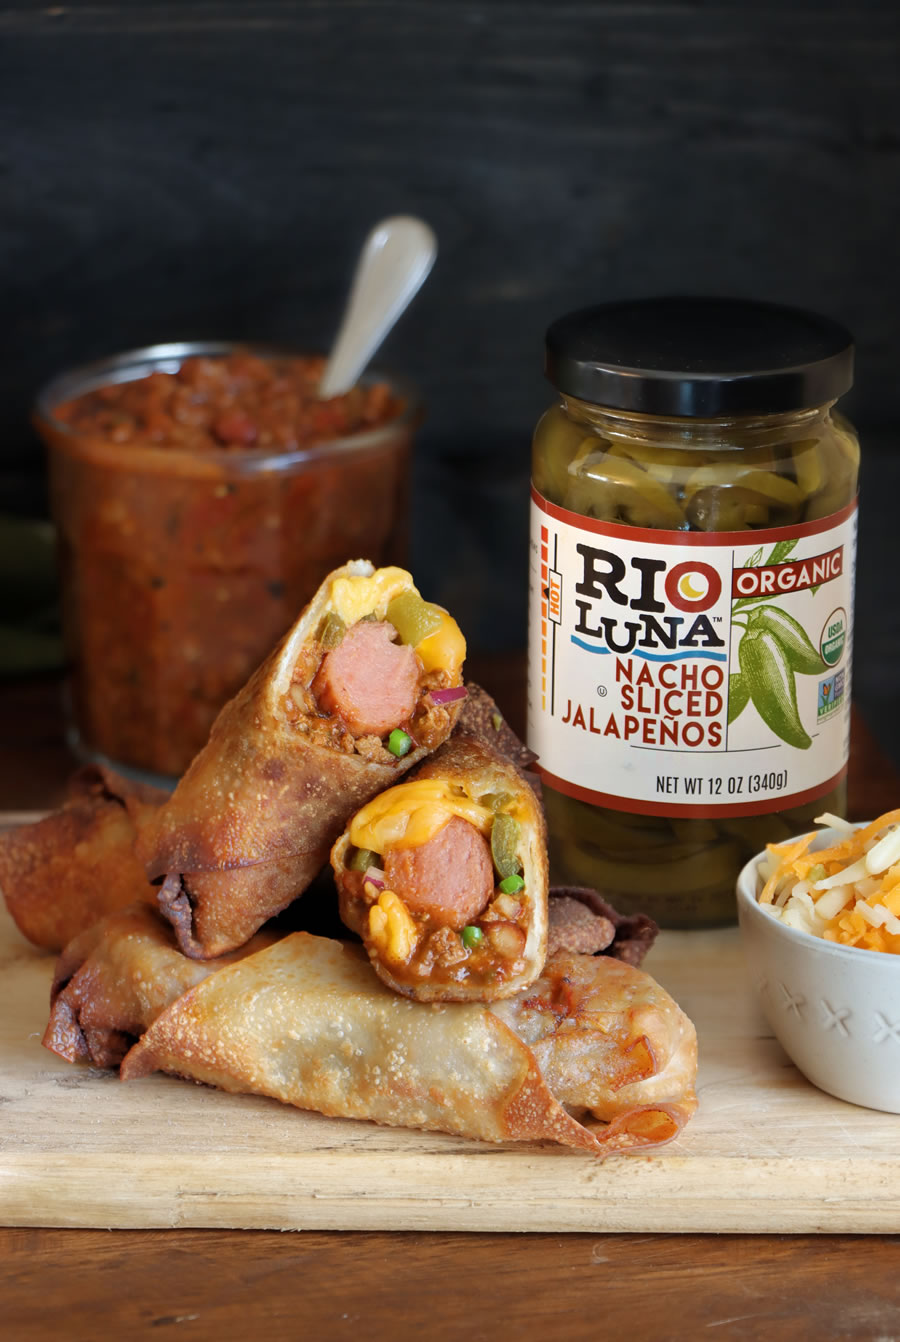 Game Day Tailgate Appetizer Chili Cheese Dog Egg Rolls With Rio Luna Organic Nacho Sliced Jalapenos and prepared chili